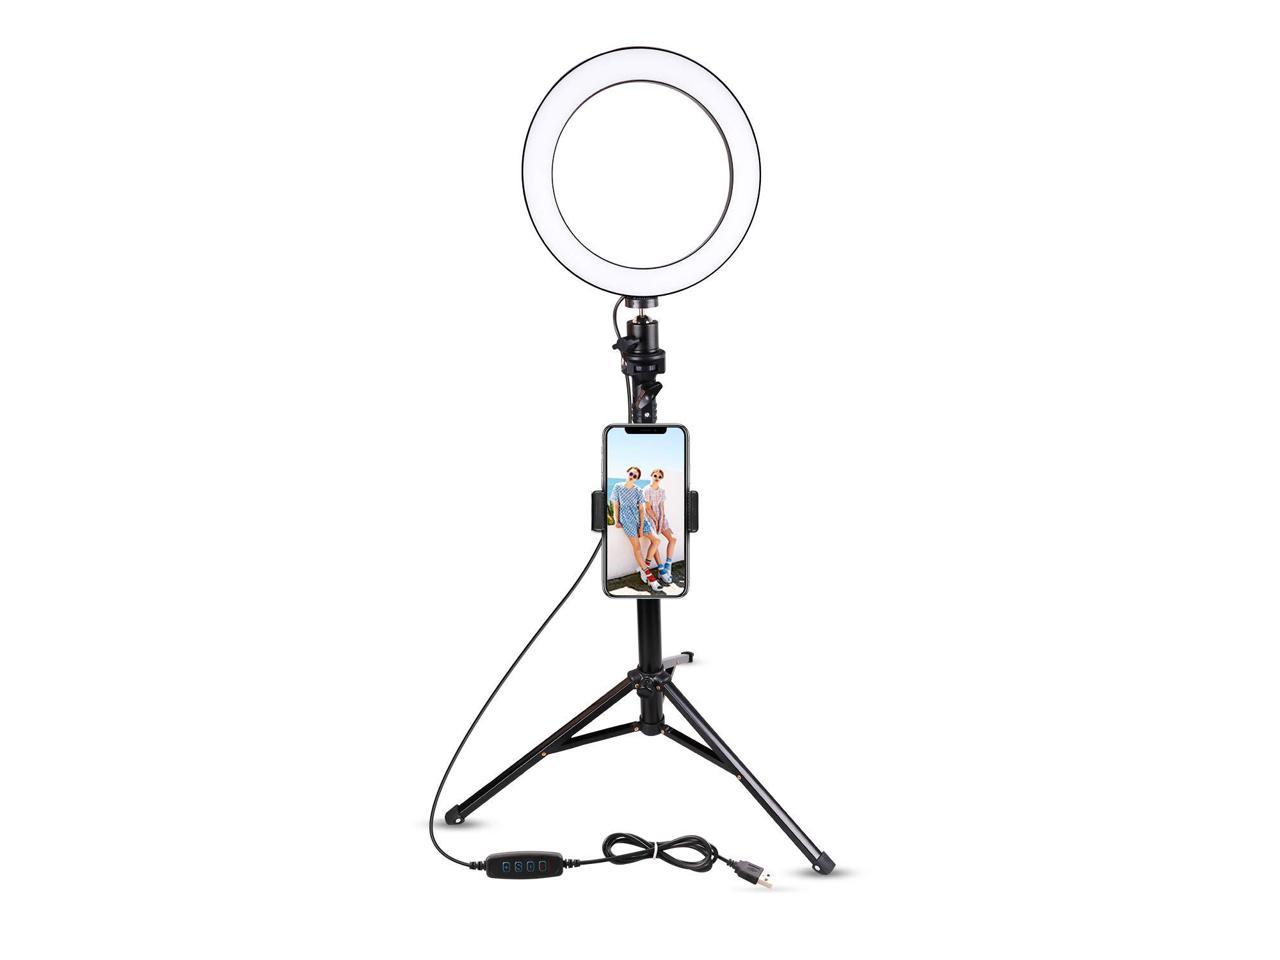 Neewer 8-inch Selfie Ring Light with Tripod Monopod Stand and Phone Holder 72 LEDs/3000-6500K/3 Light Modes/10-level Brightness Dimmable USB Ringlight for Makeup/Live/YouTube Video Photography 